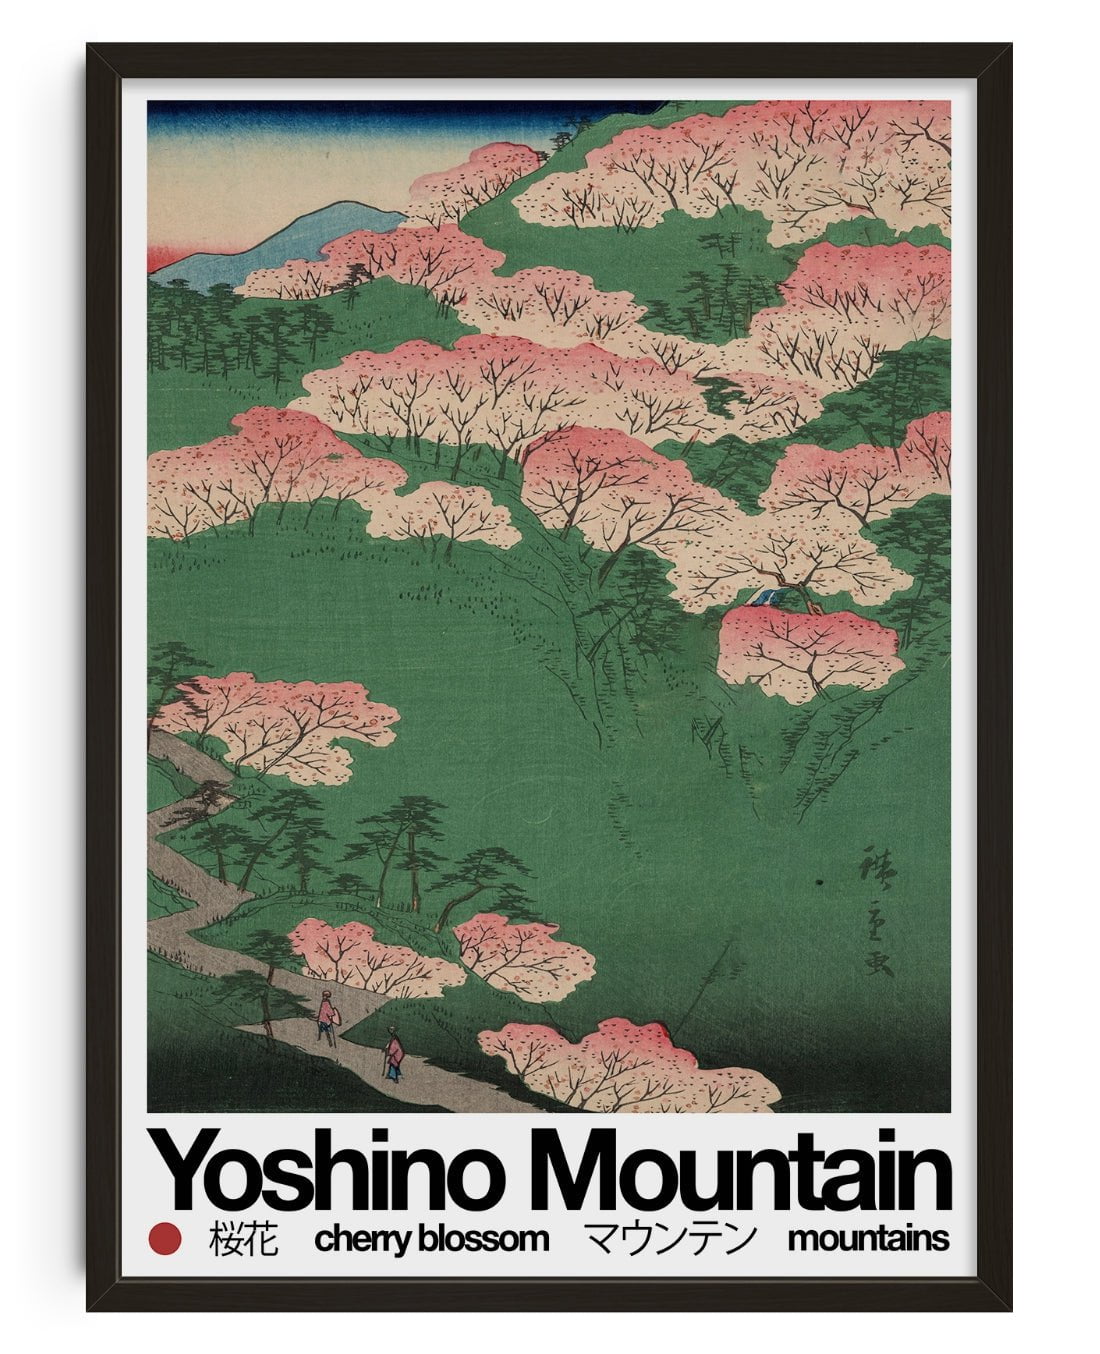 11.7x16.5" (A3) Yoshino Mountain - UNFRAMED contemporary wall art print by George Kempster - sold by DROOL